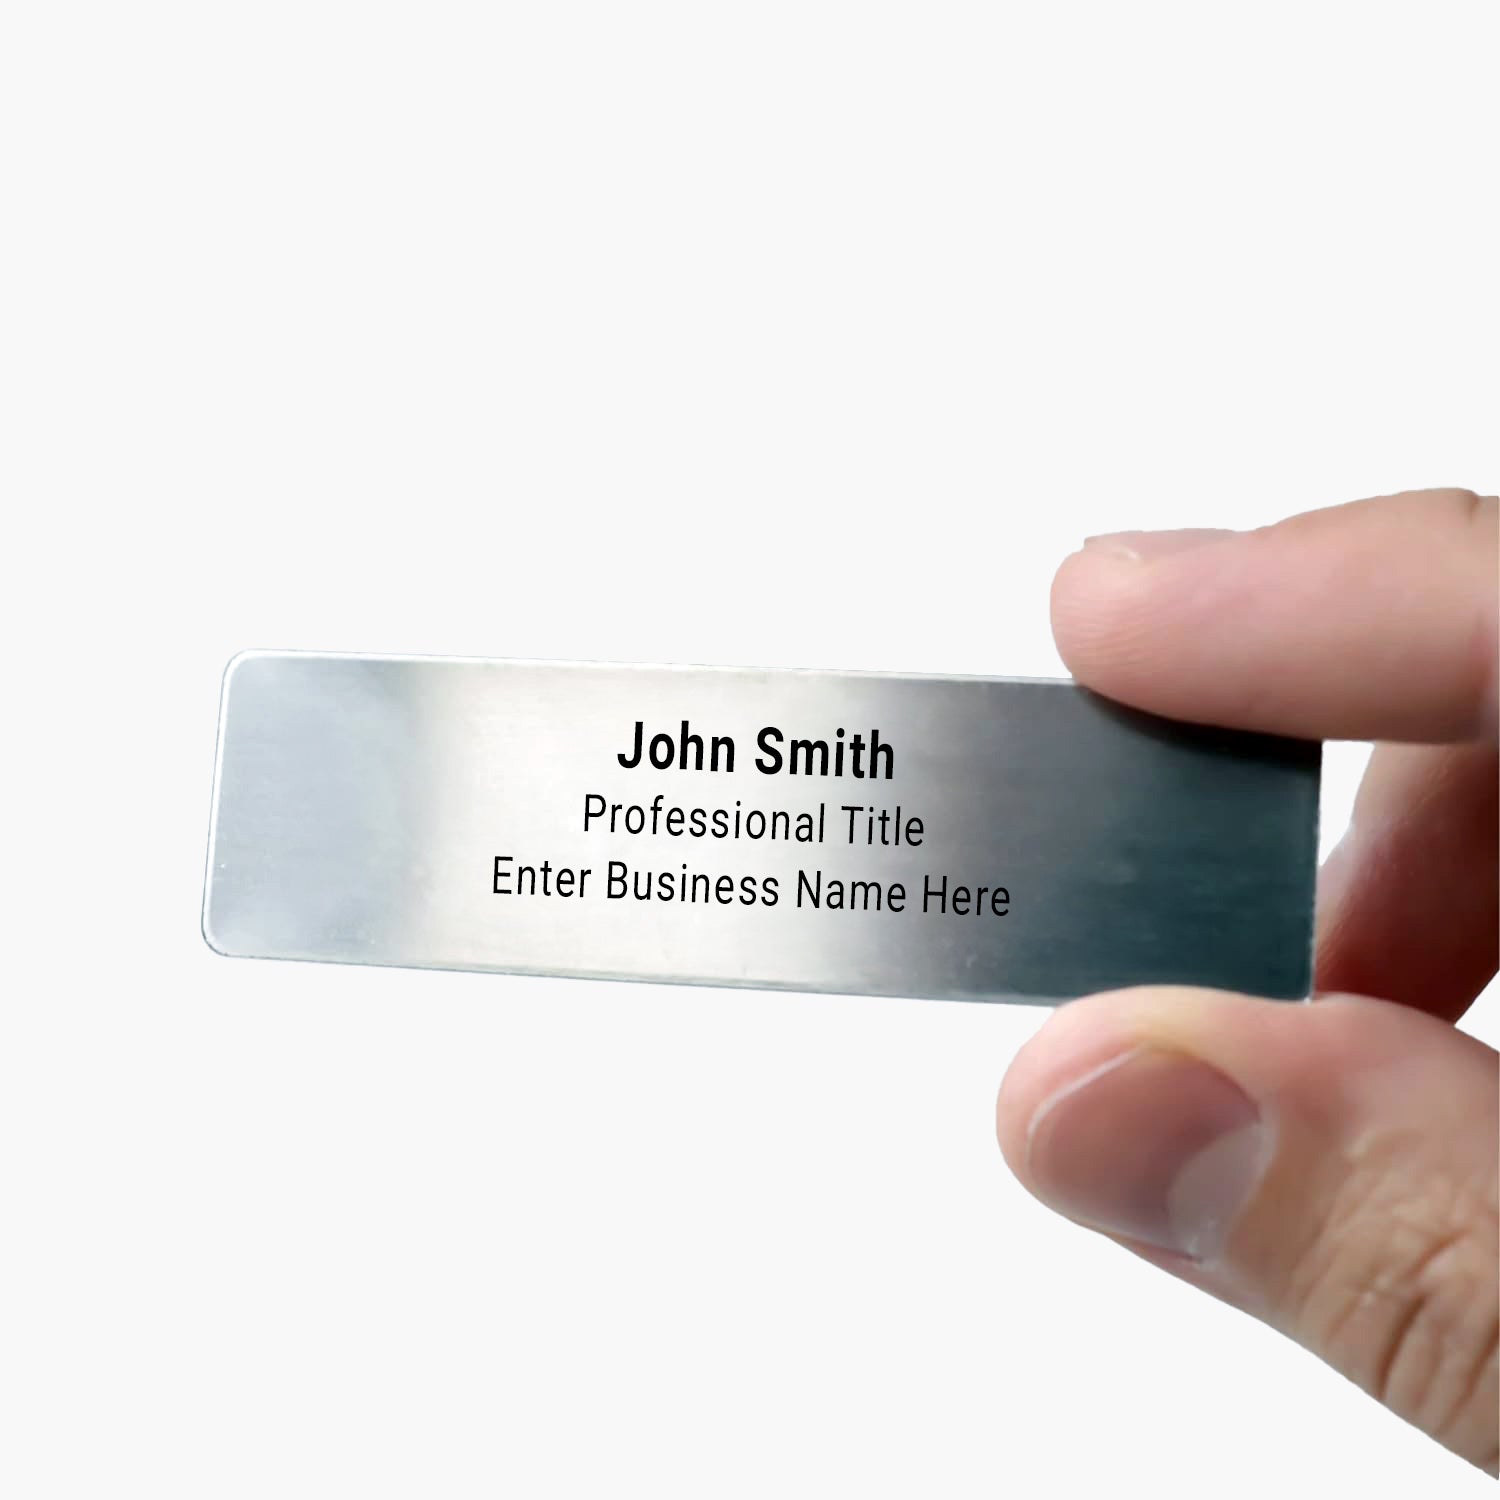 Custom Engraved Name Tag Badges – Personalized Identification with Pin